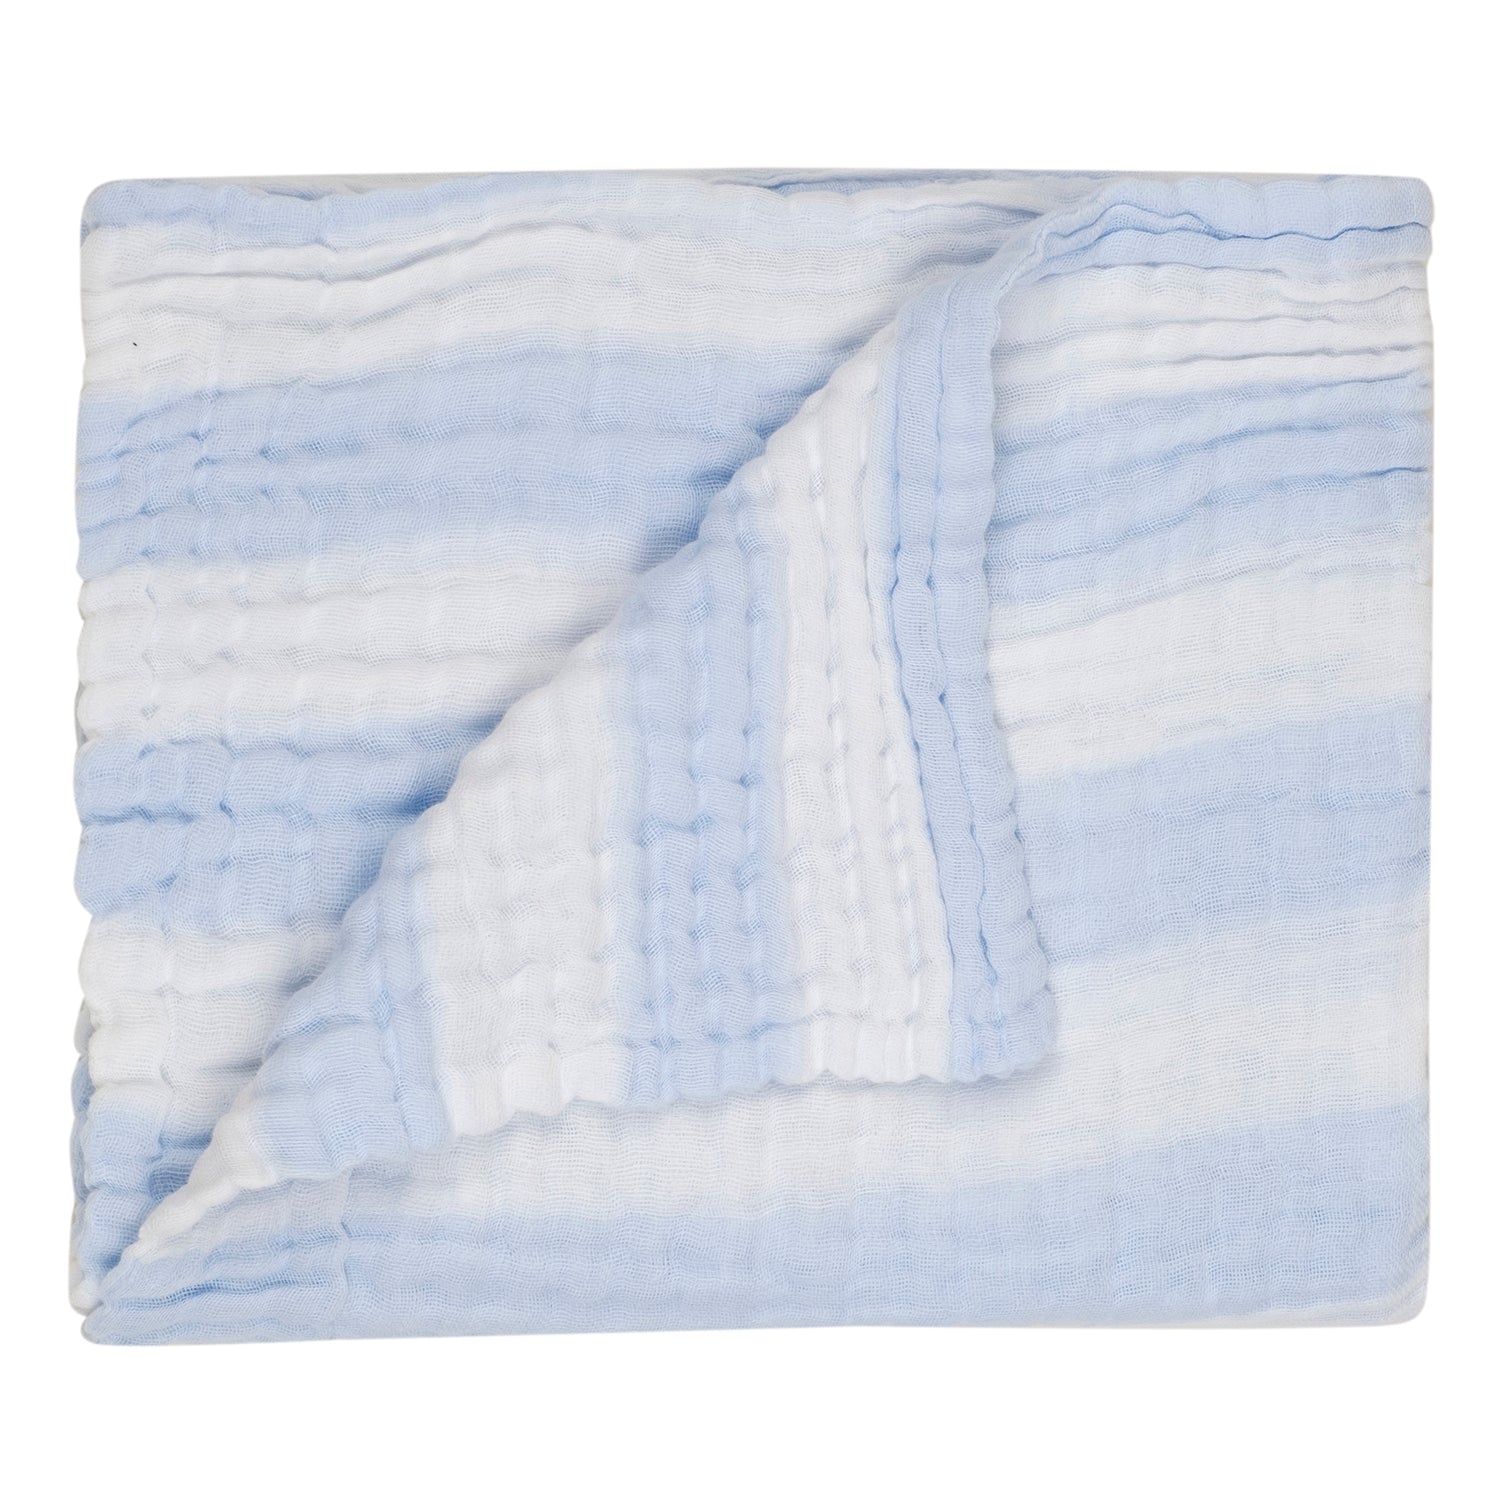 Baby Moo Premium Striped 100% Cotton Ultra Soft Eco Friendly Absorbent Towel - Blue